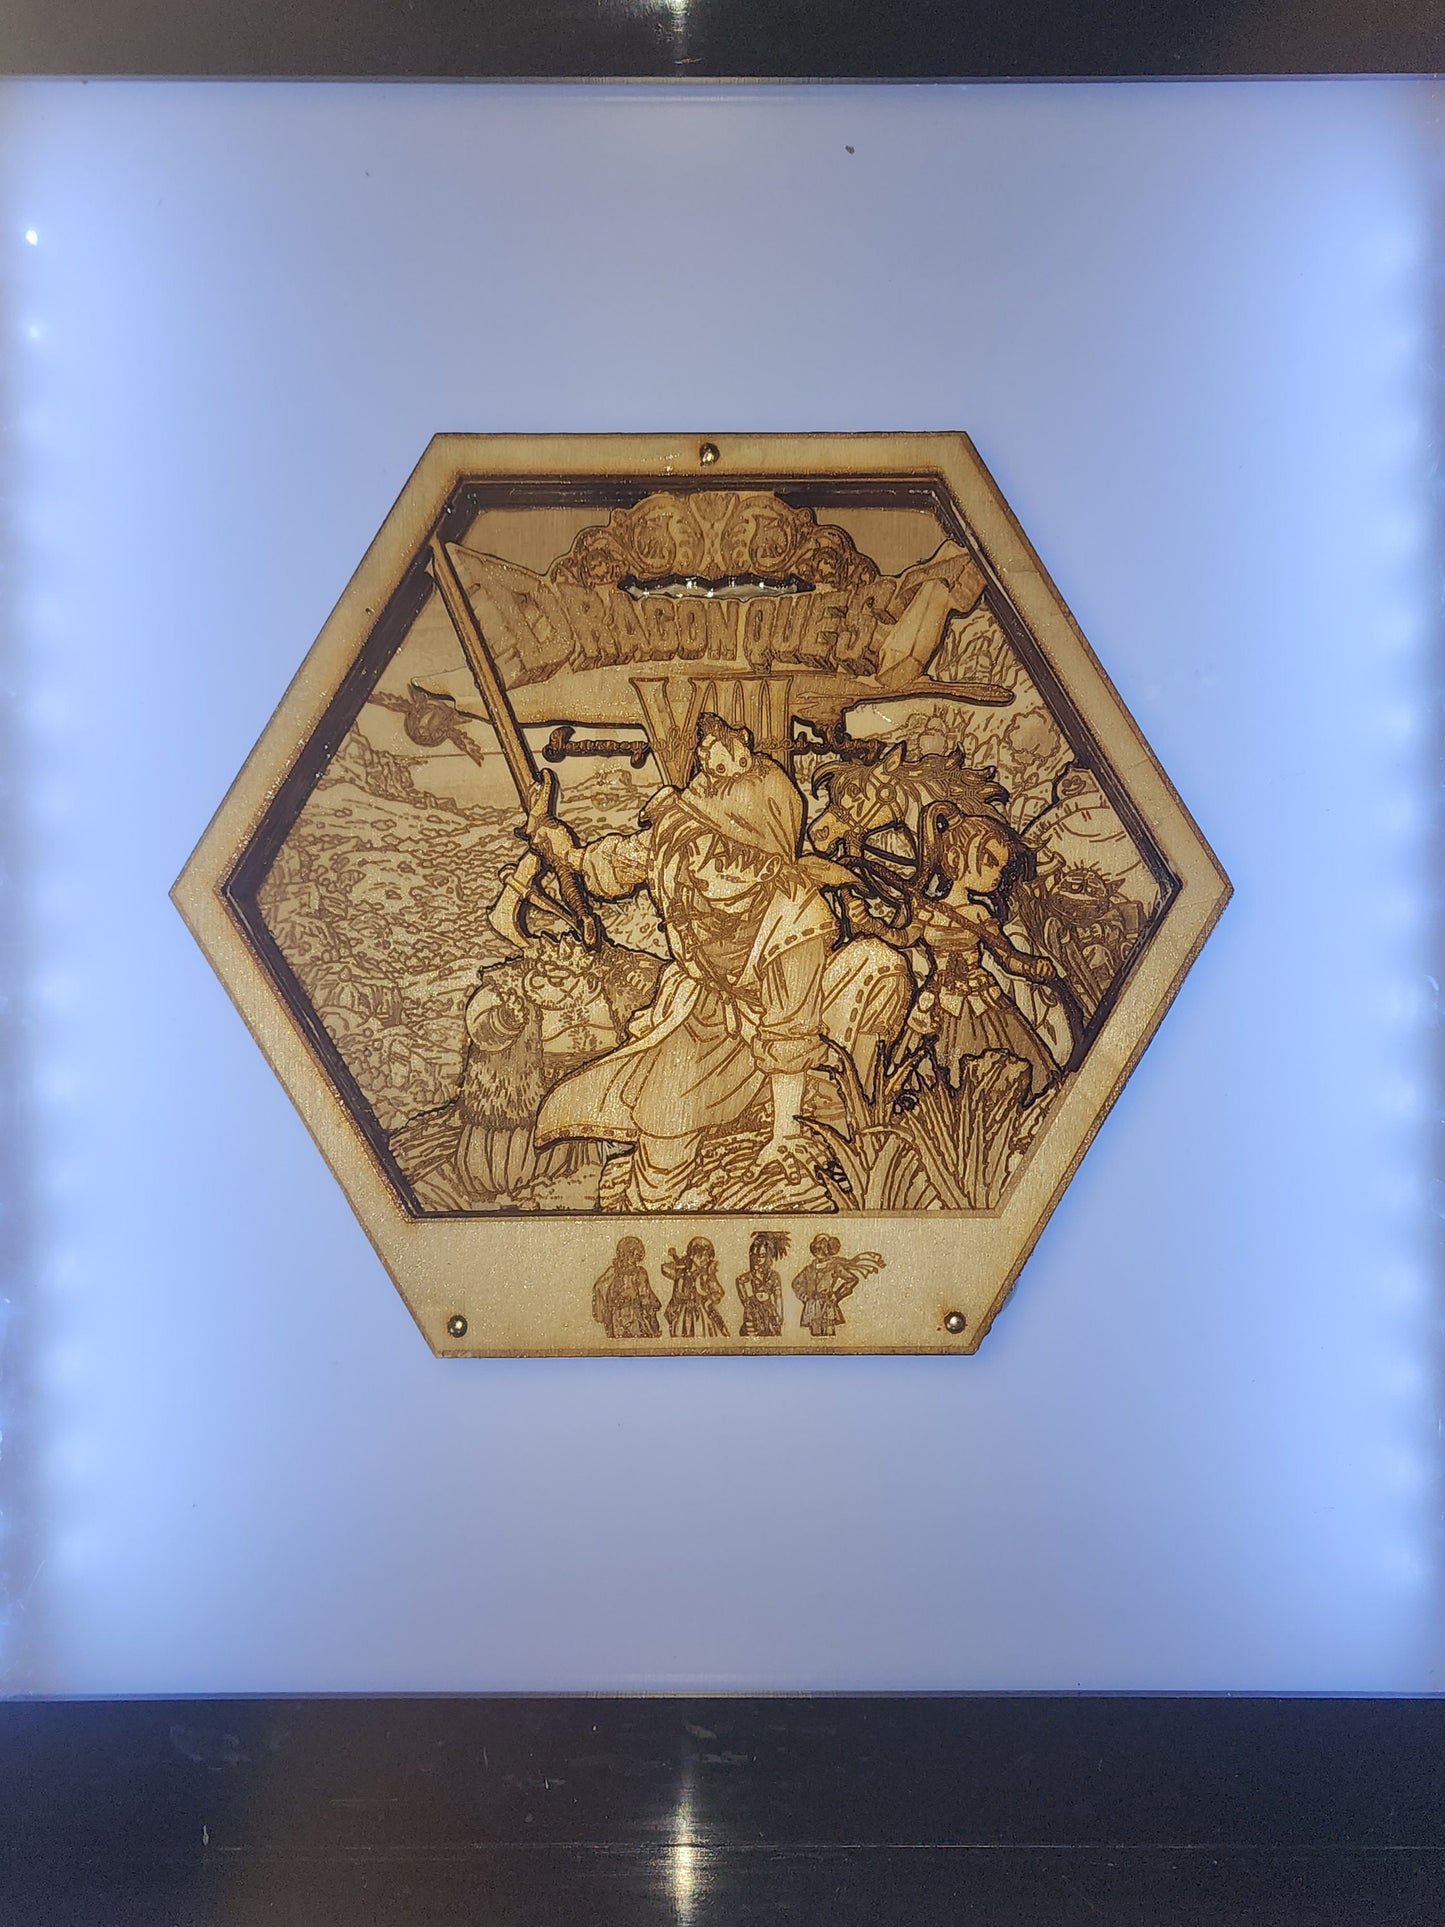 Dragon Quest 8 - Journey of the Cursed King | 3D Wooden Artwork PlaqueArts | Unforgettable gift for gamers